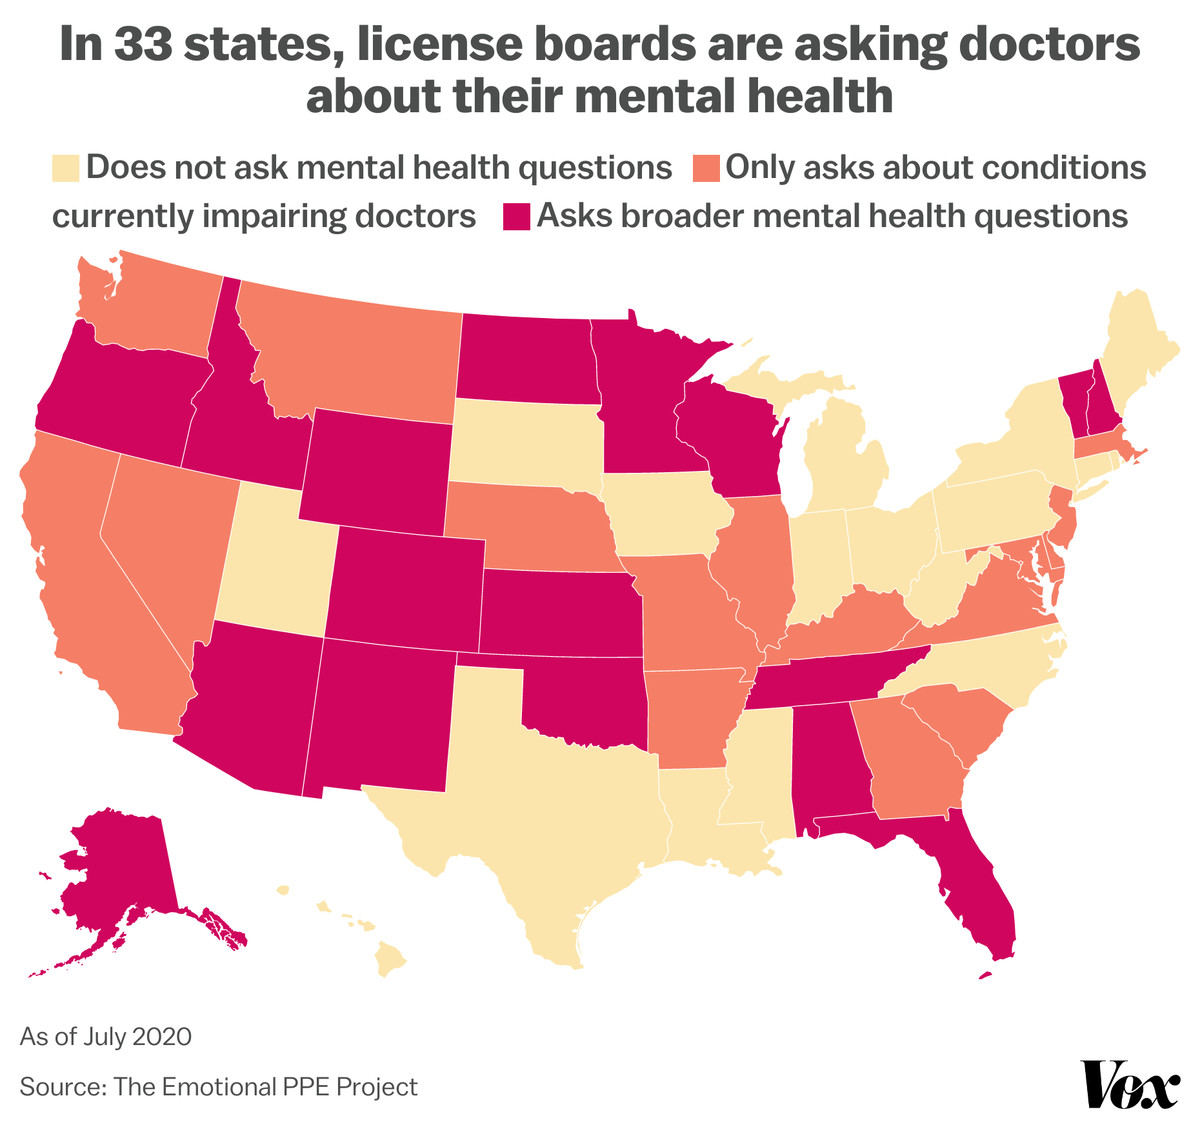 In 33 states, license boards are asking doctors about their mental health